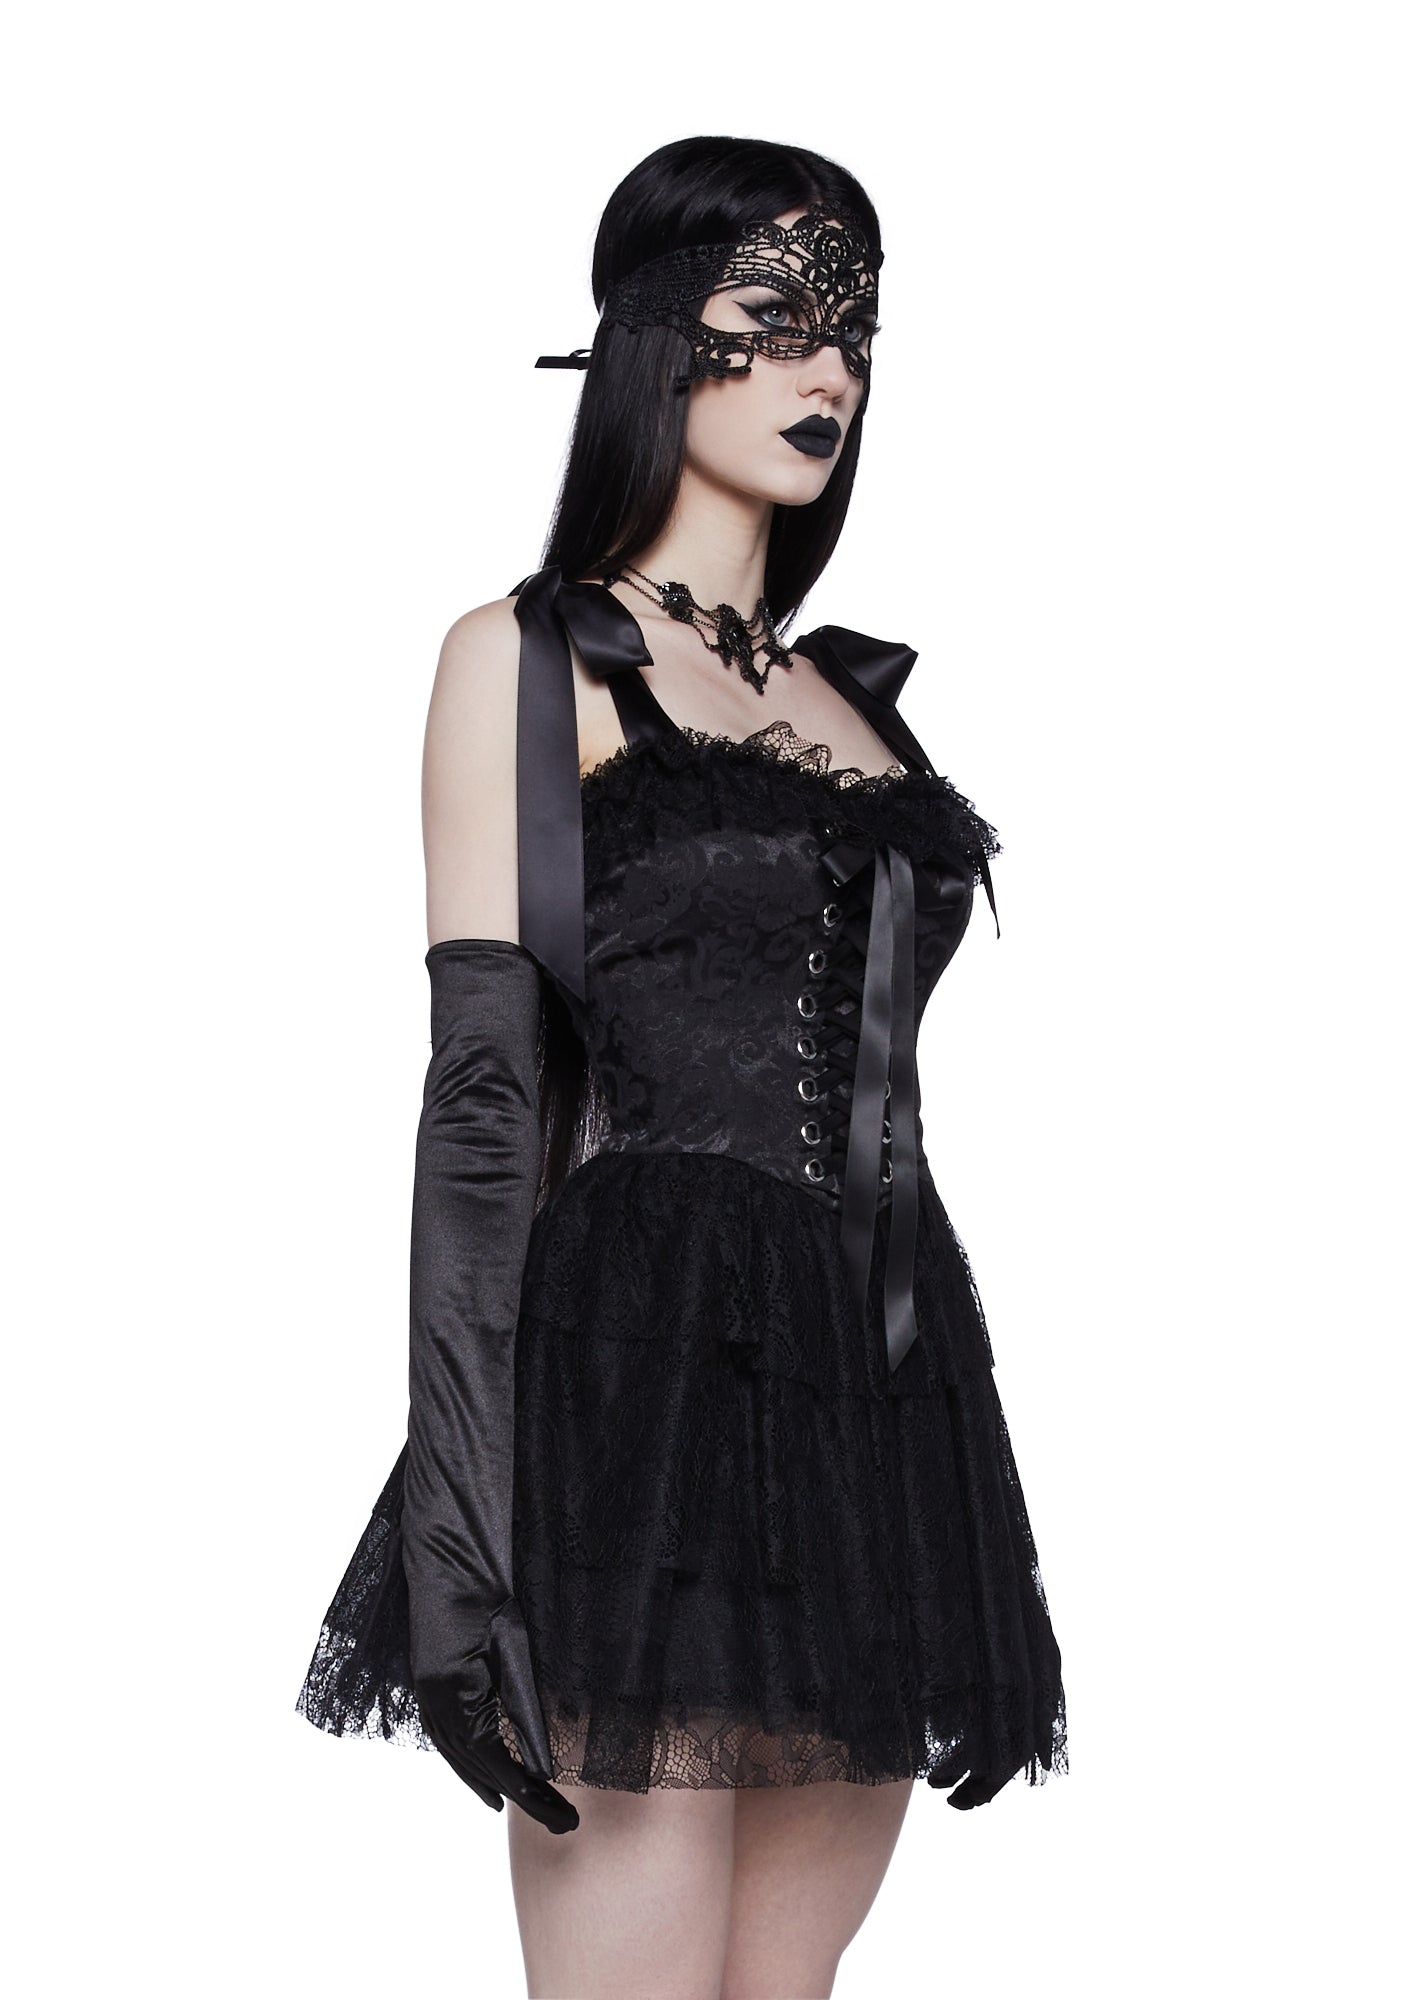 Marie Antoinette Goth French Queen Costume - Black – Dolls Kill